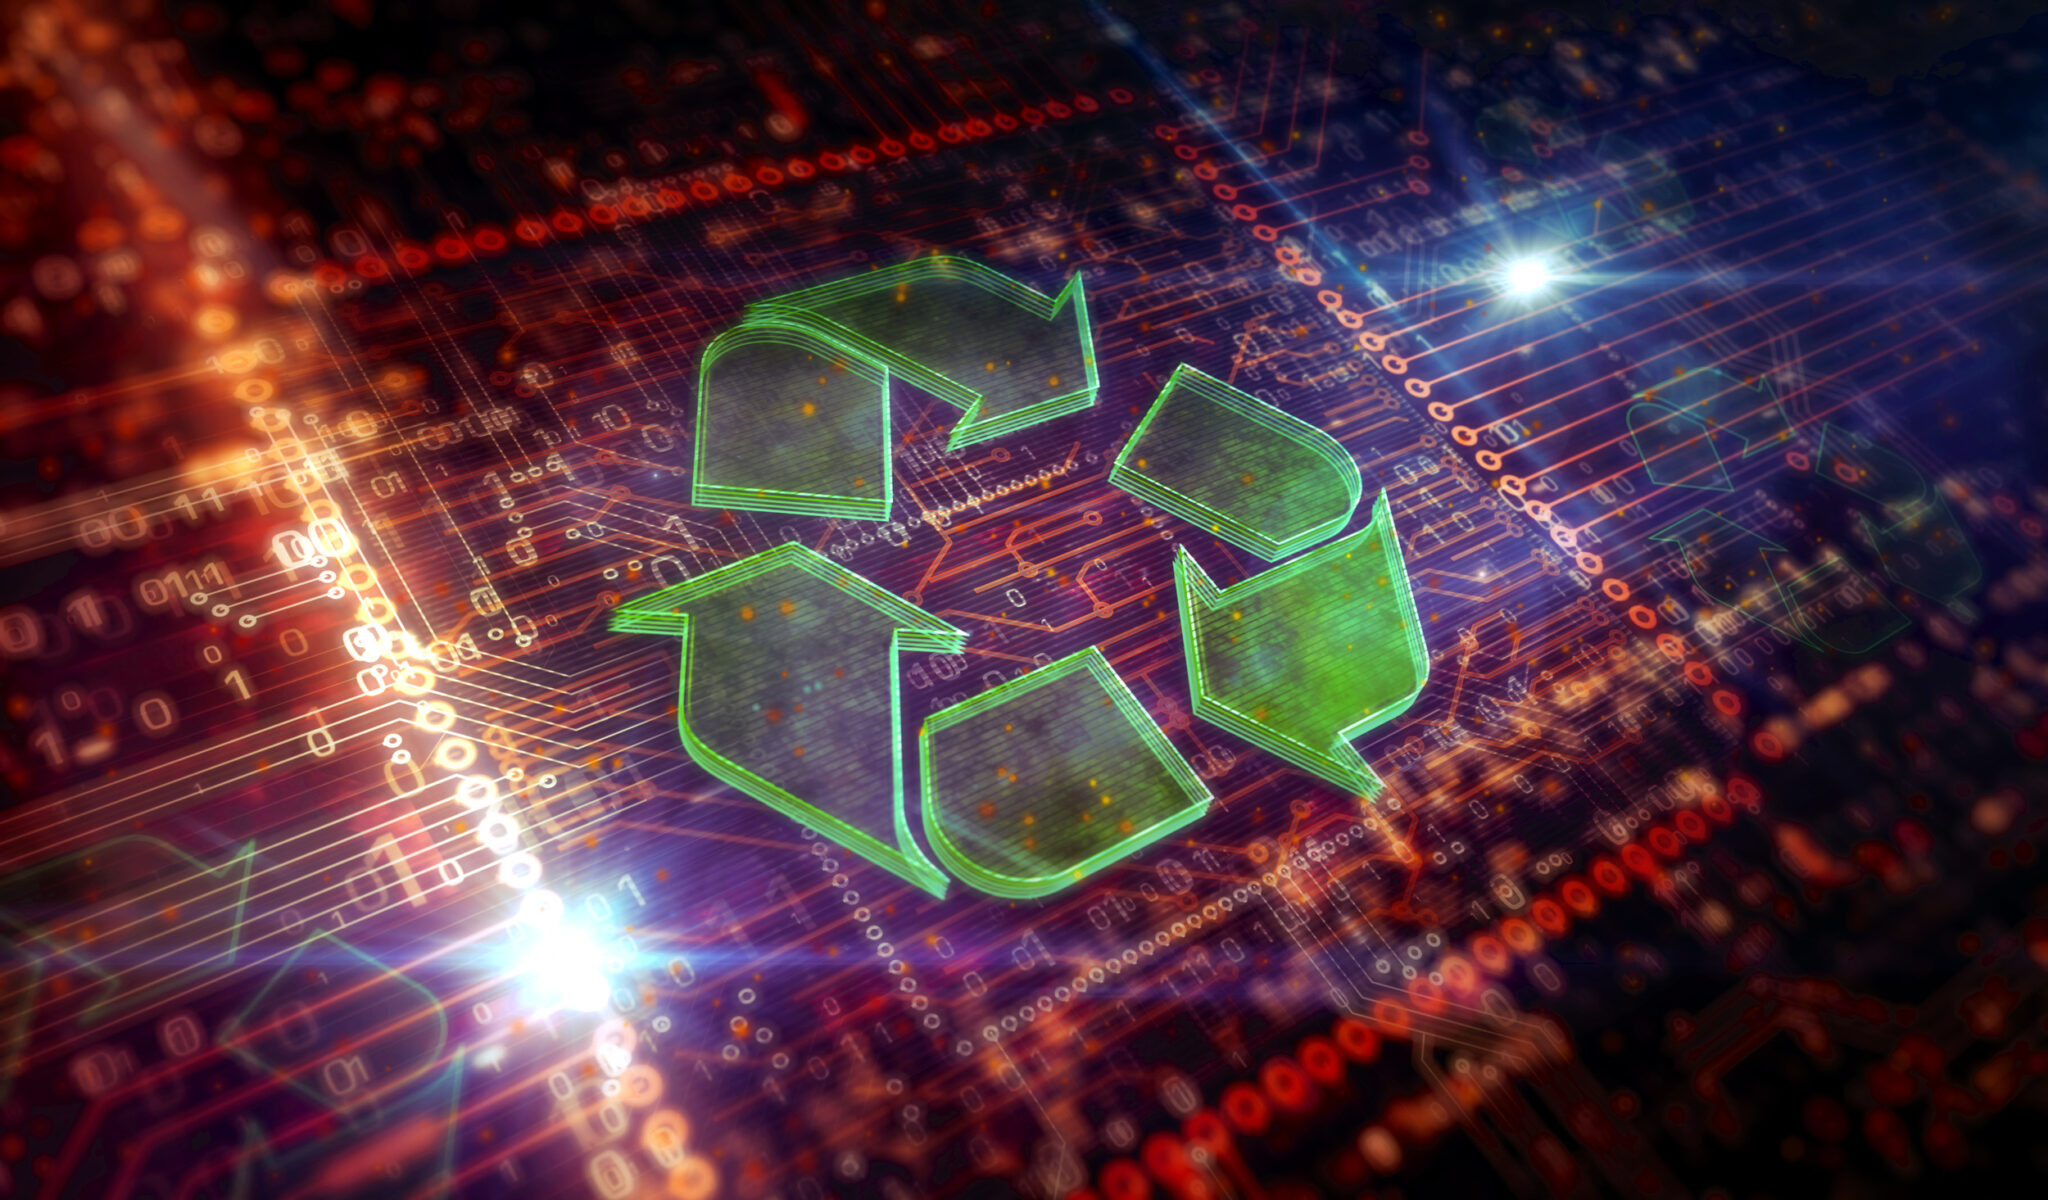 Recycling symbol, environment, ecology, reduce e-waste, green technology and industry icon. Abstract 3d symbol concept rendering illustration.